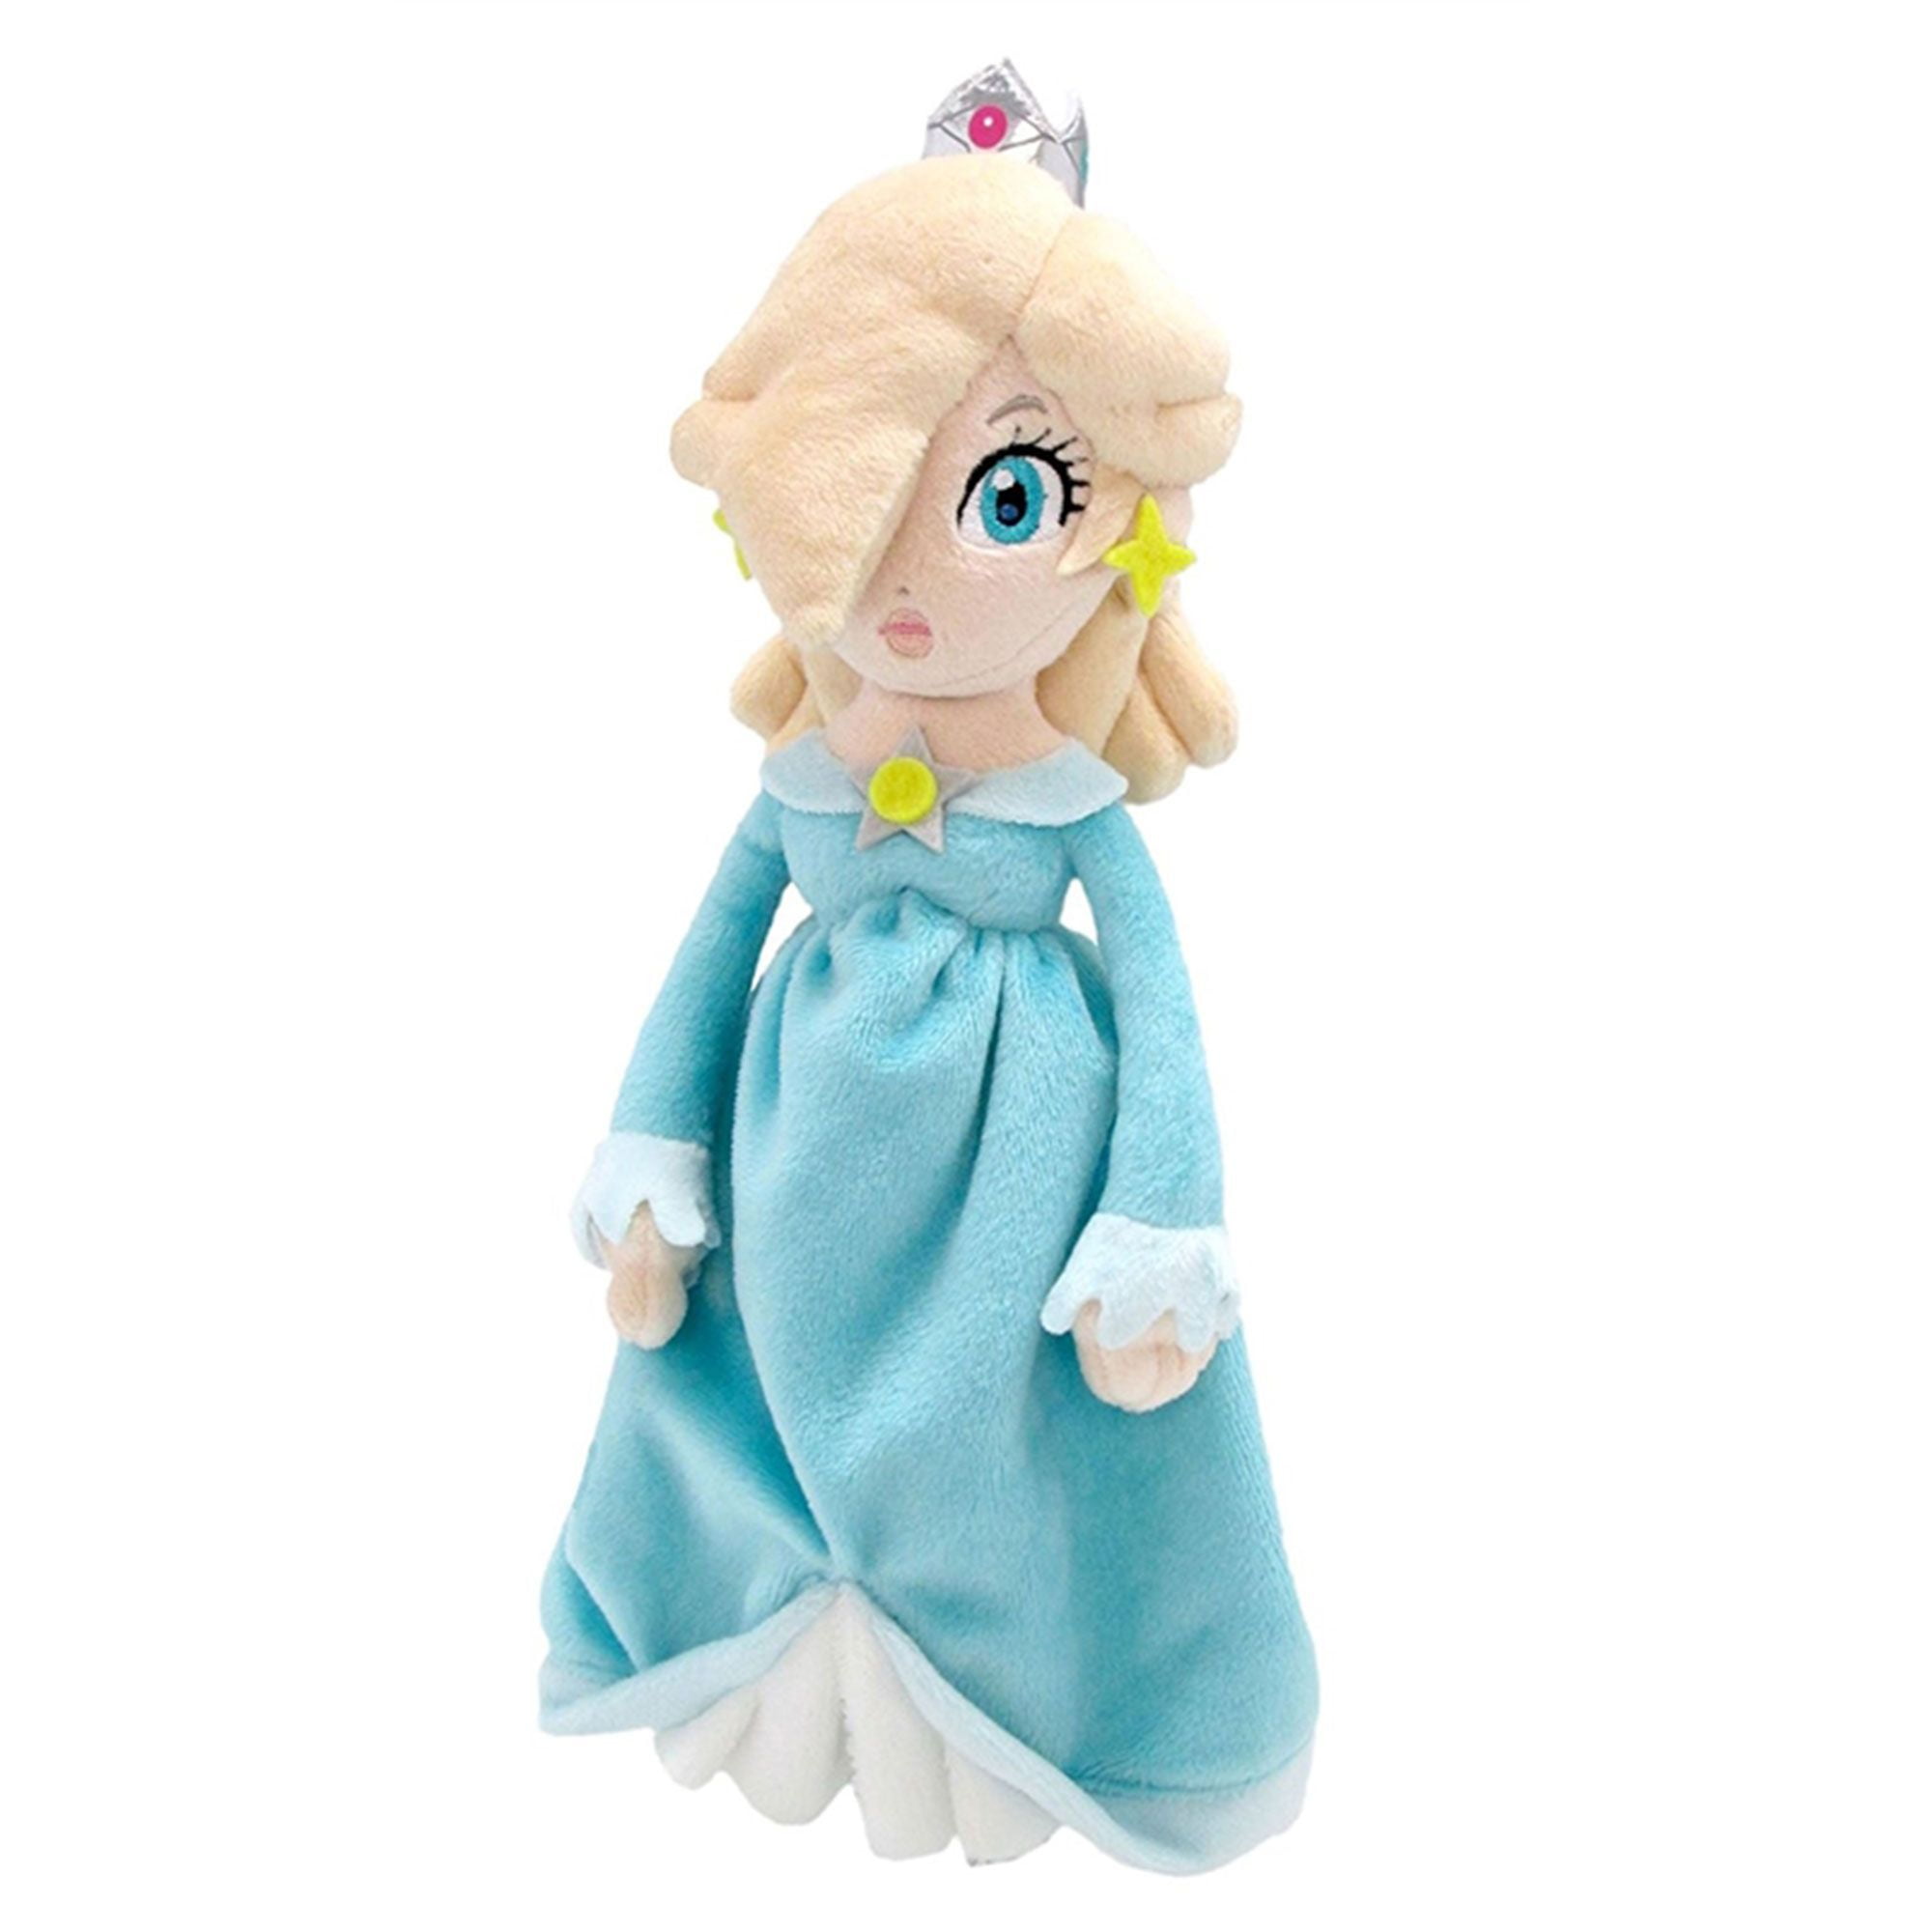 Plushie 5" Official Plush NEW Super Mario Bros Little Buddy Baby Rosalina 